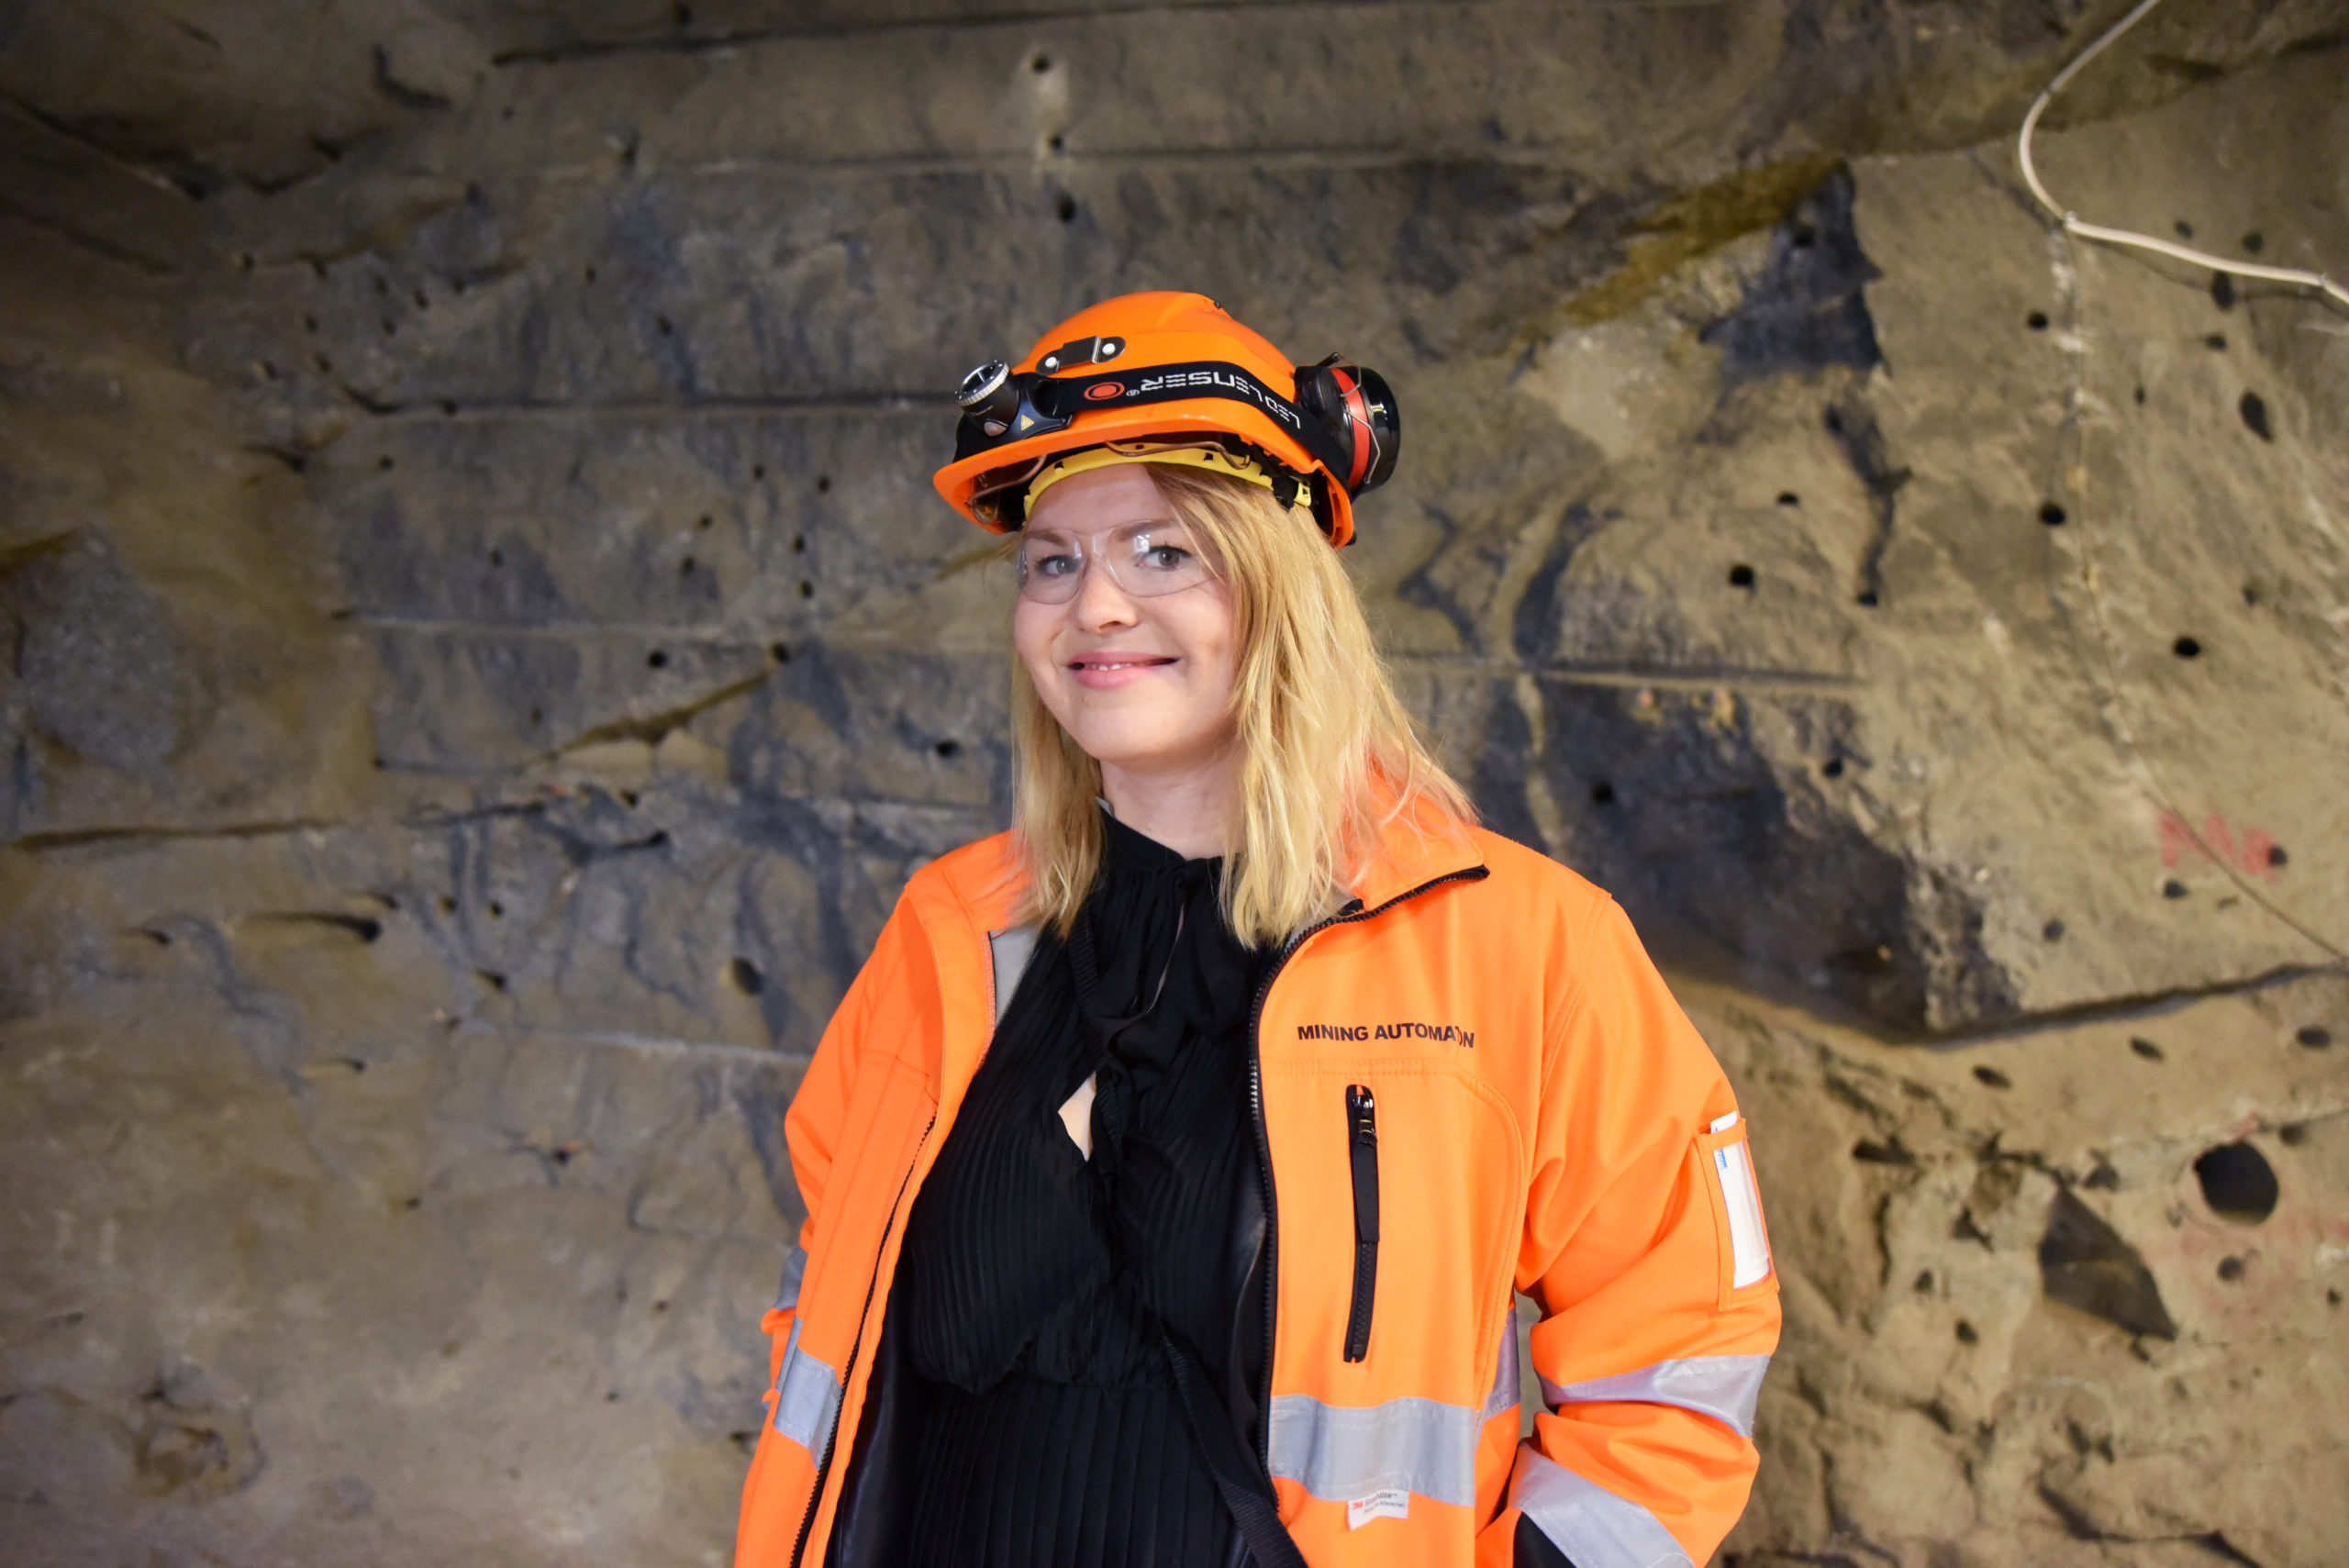 Elen Toodu is the Director of Global Automation Product Line & Projects at Sandvik Mining and Rock Solutions.